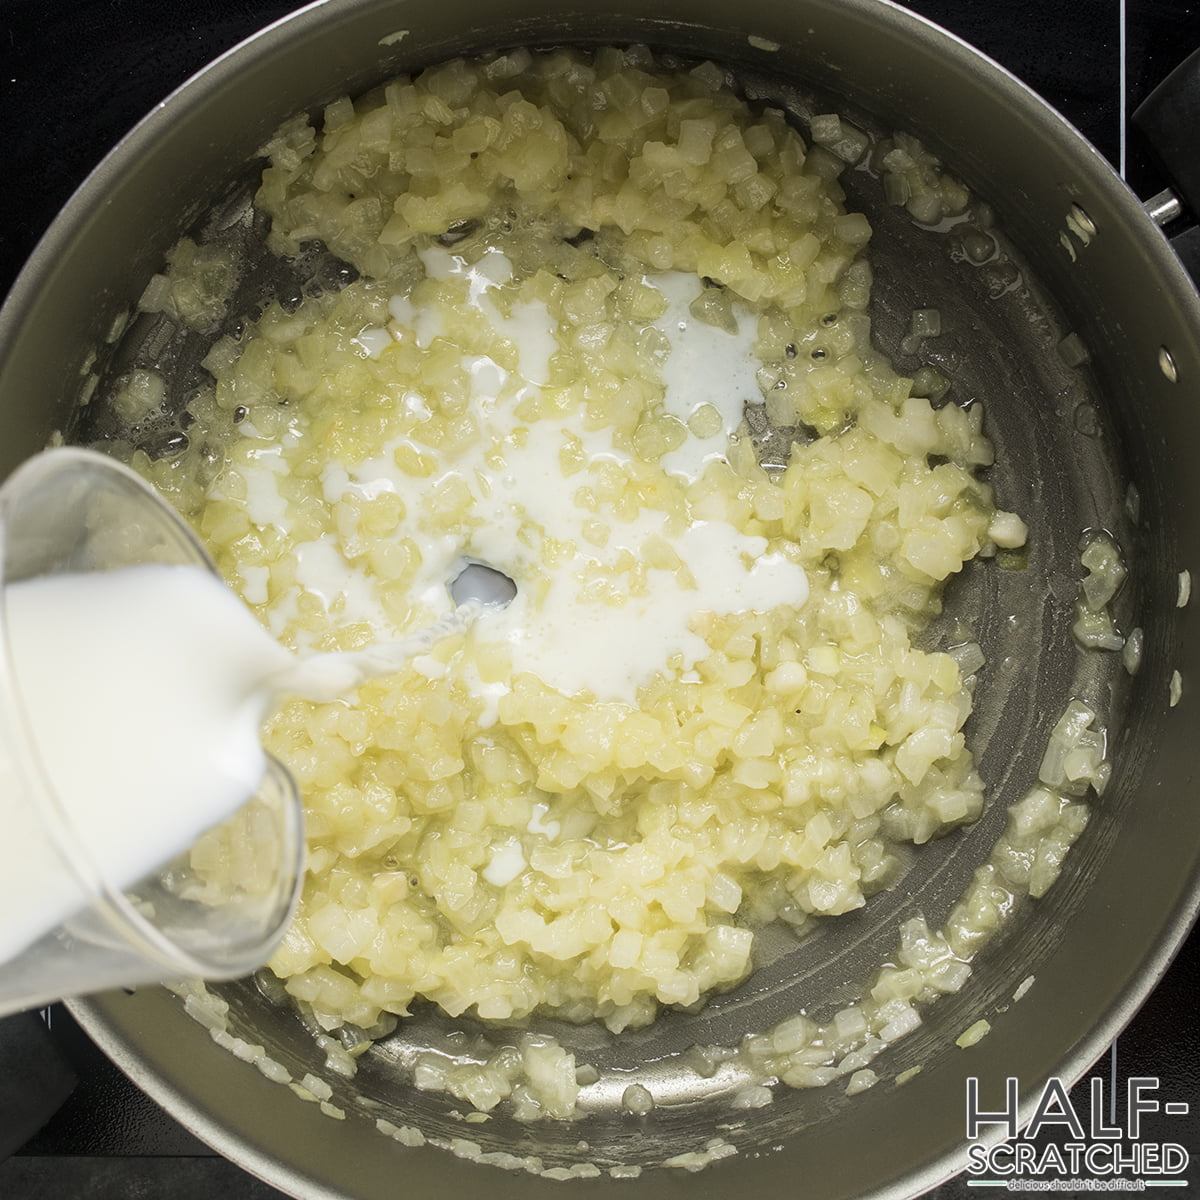 Adding milk to a mixture of onion and flour